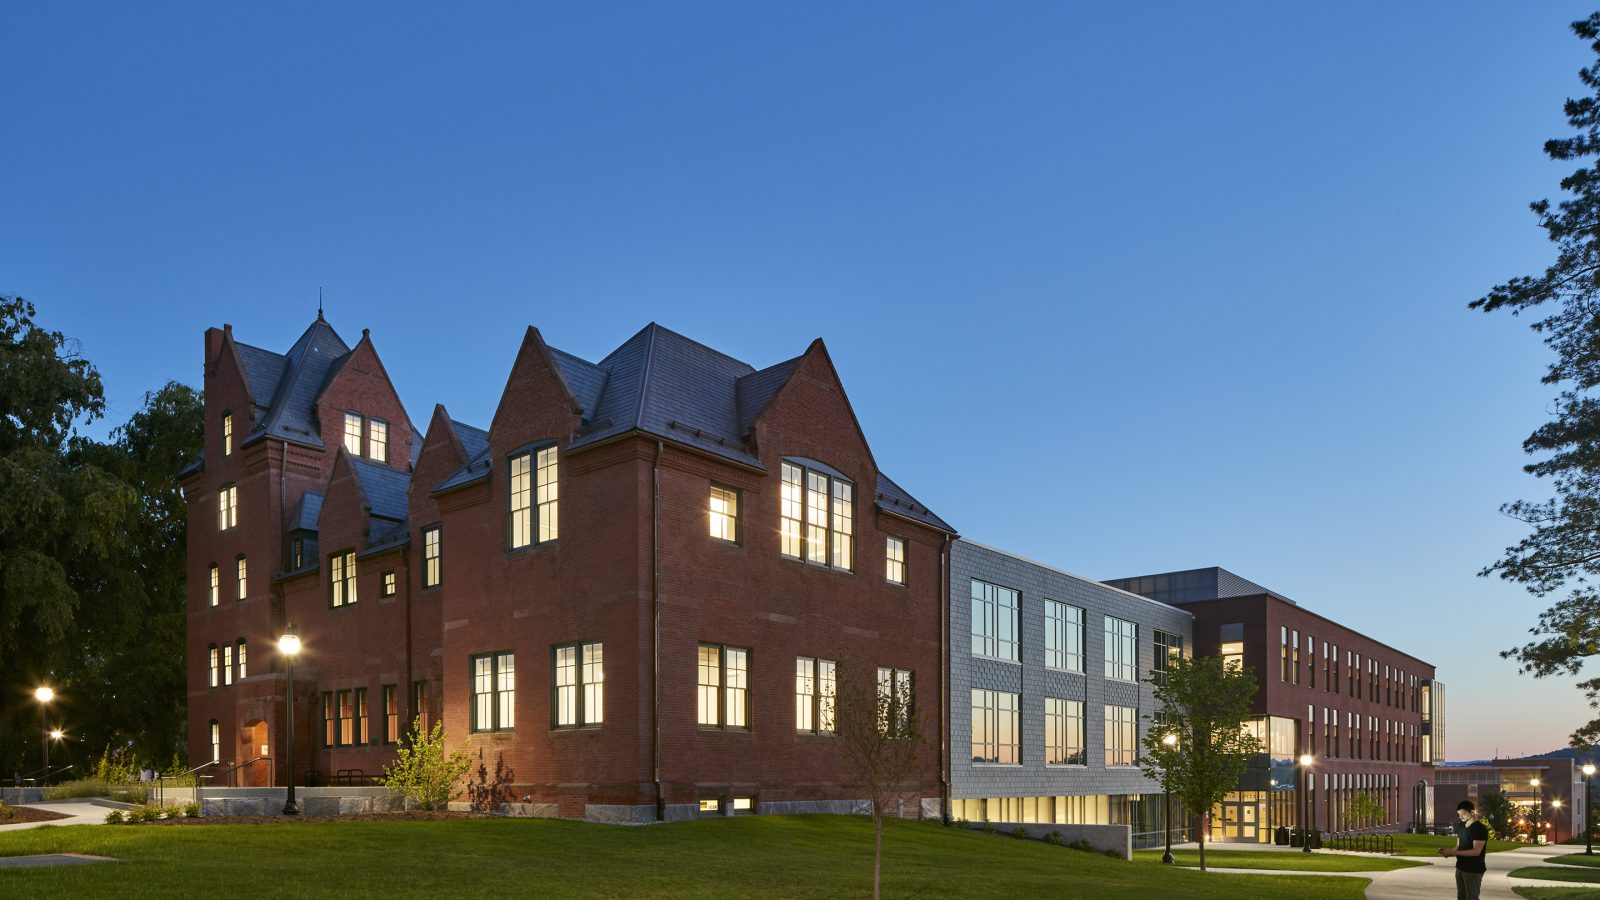 A large red brick South College Academic Facility at dusk in University of Massachusetts–Amherst.